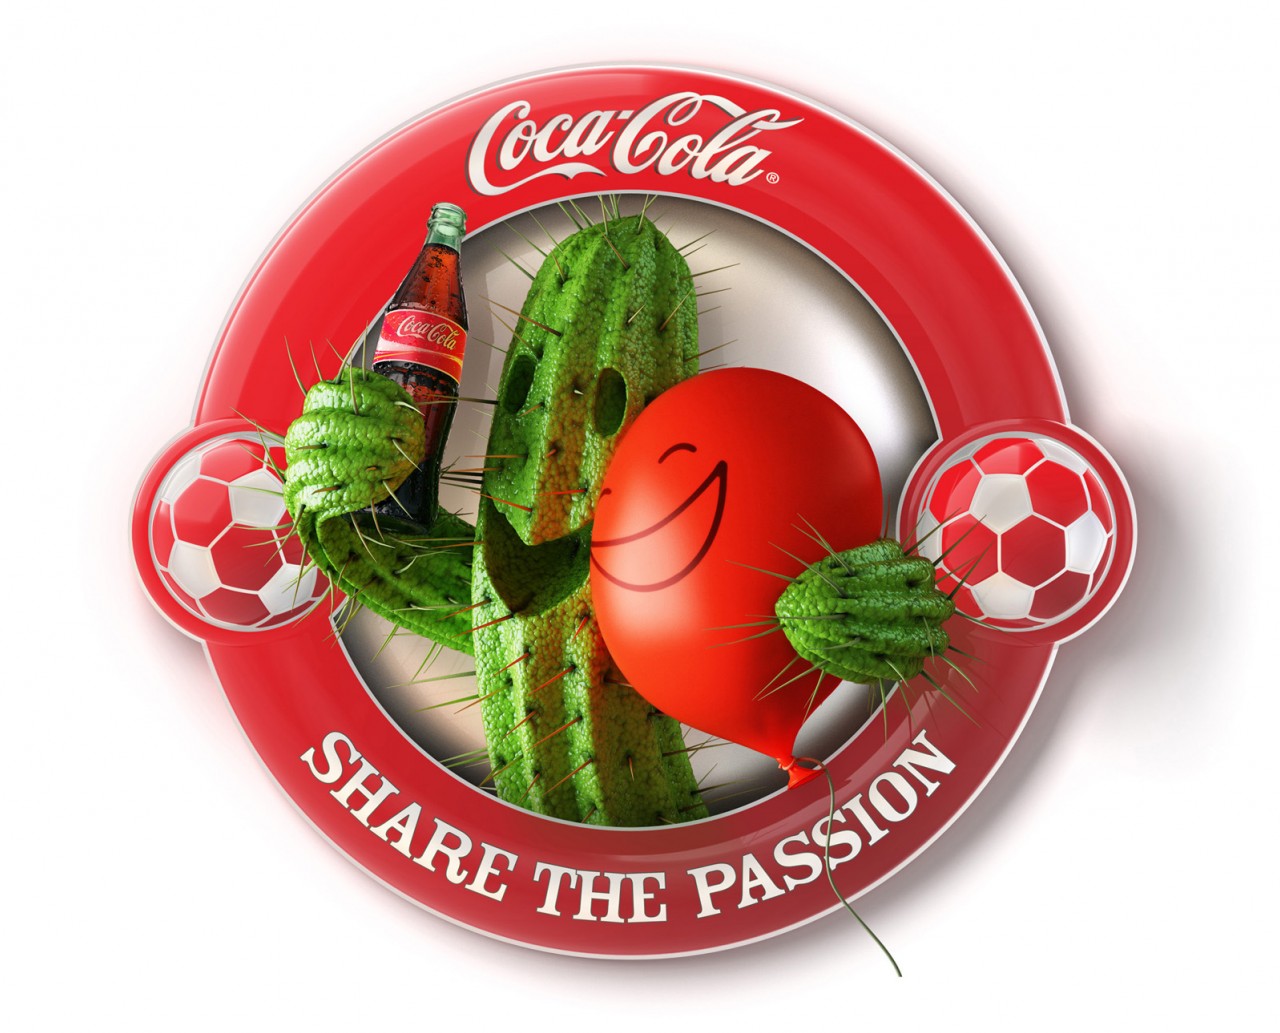 Coca Cola campaign for football championship, the cactus and the balloon